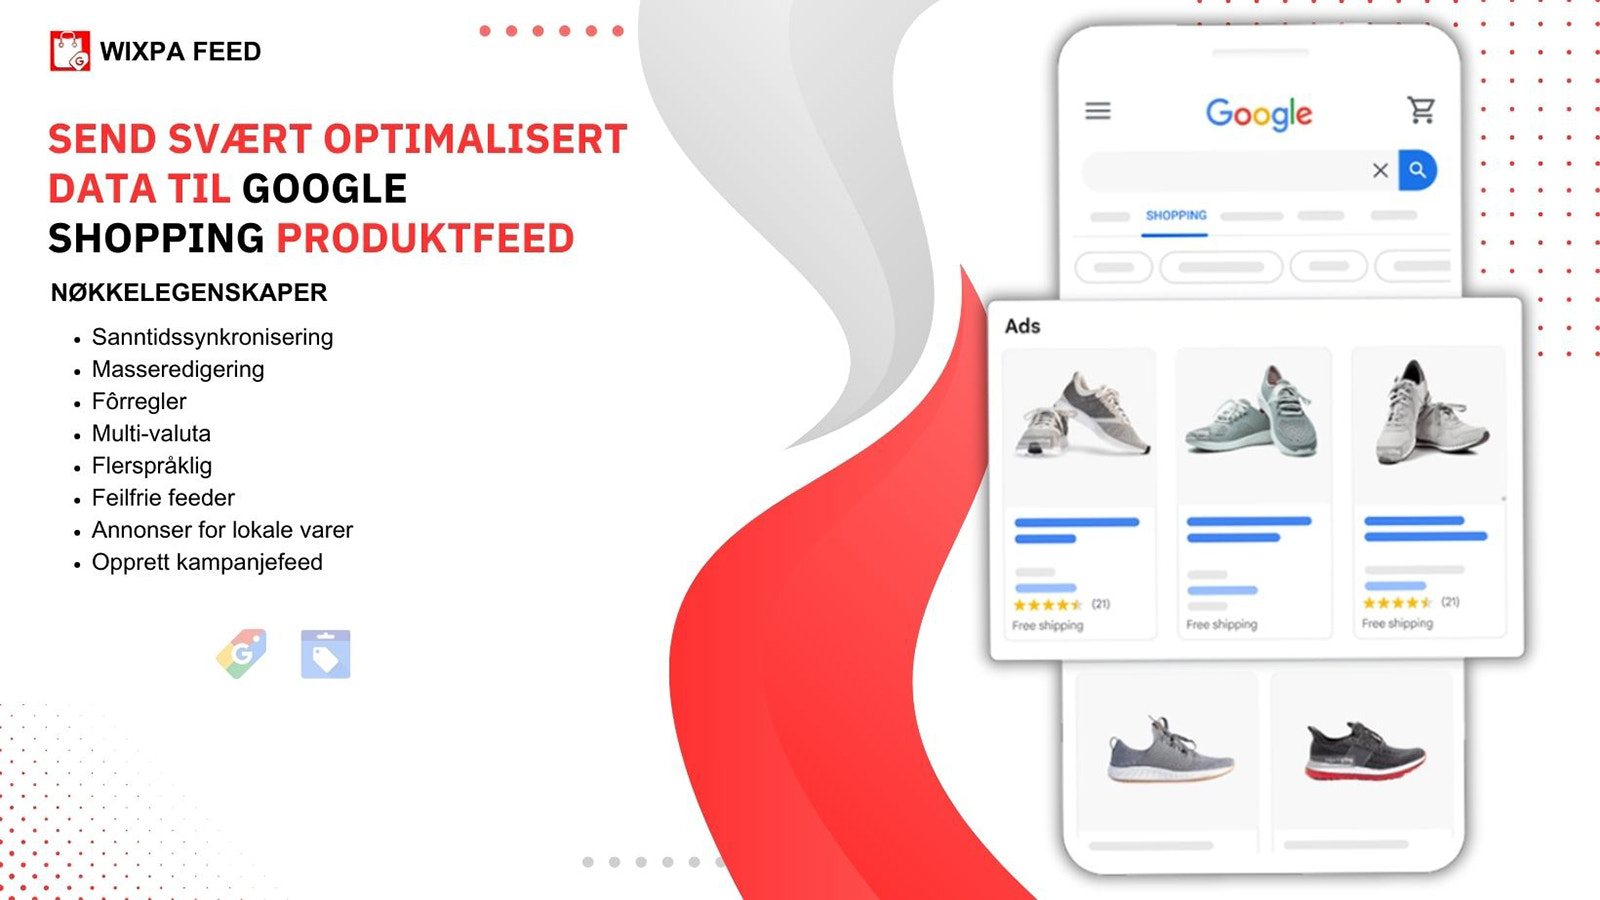 wixpa-feed for Google Shopping